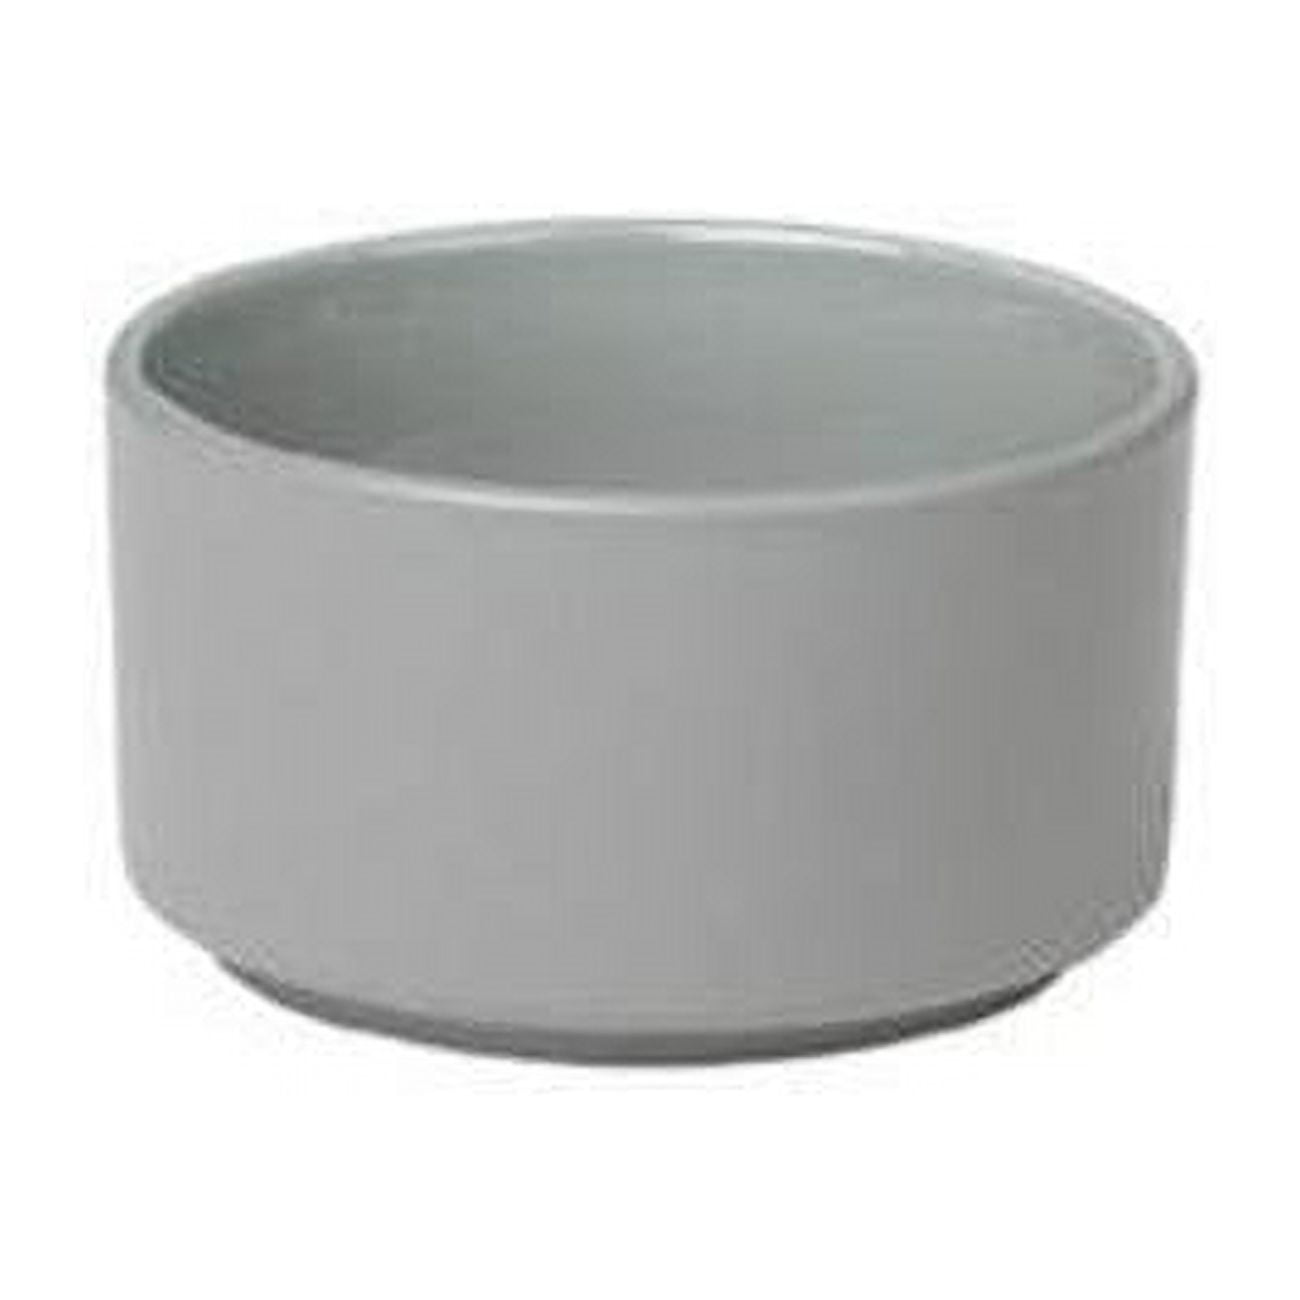 63721.4 3 In. Mio Small Bowl, Grey - Set Of 4